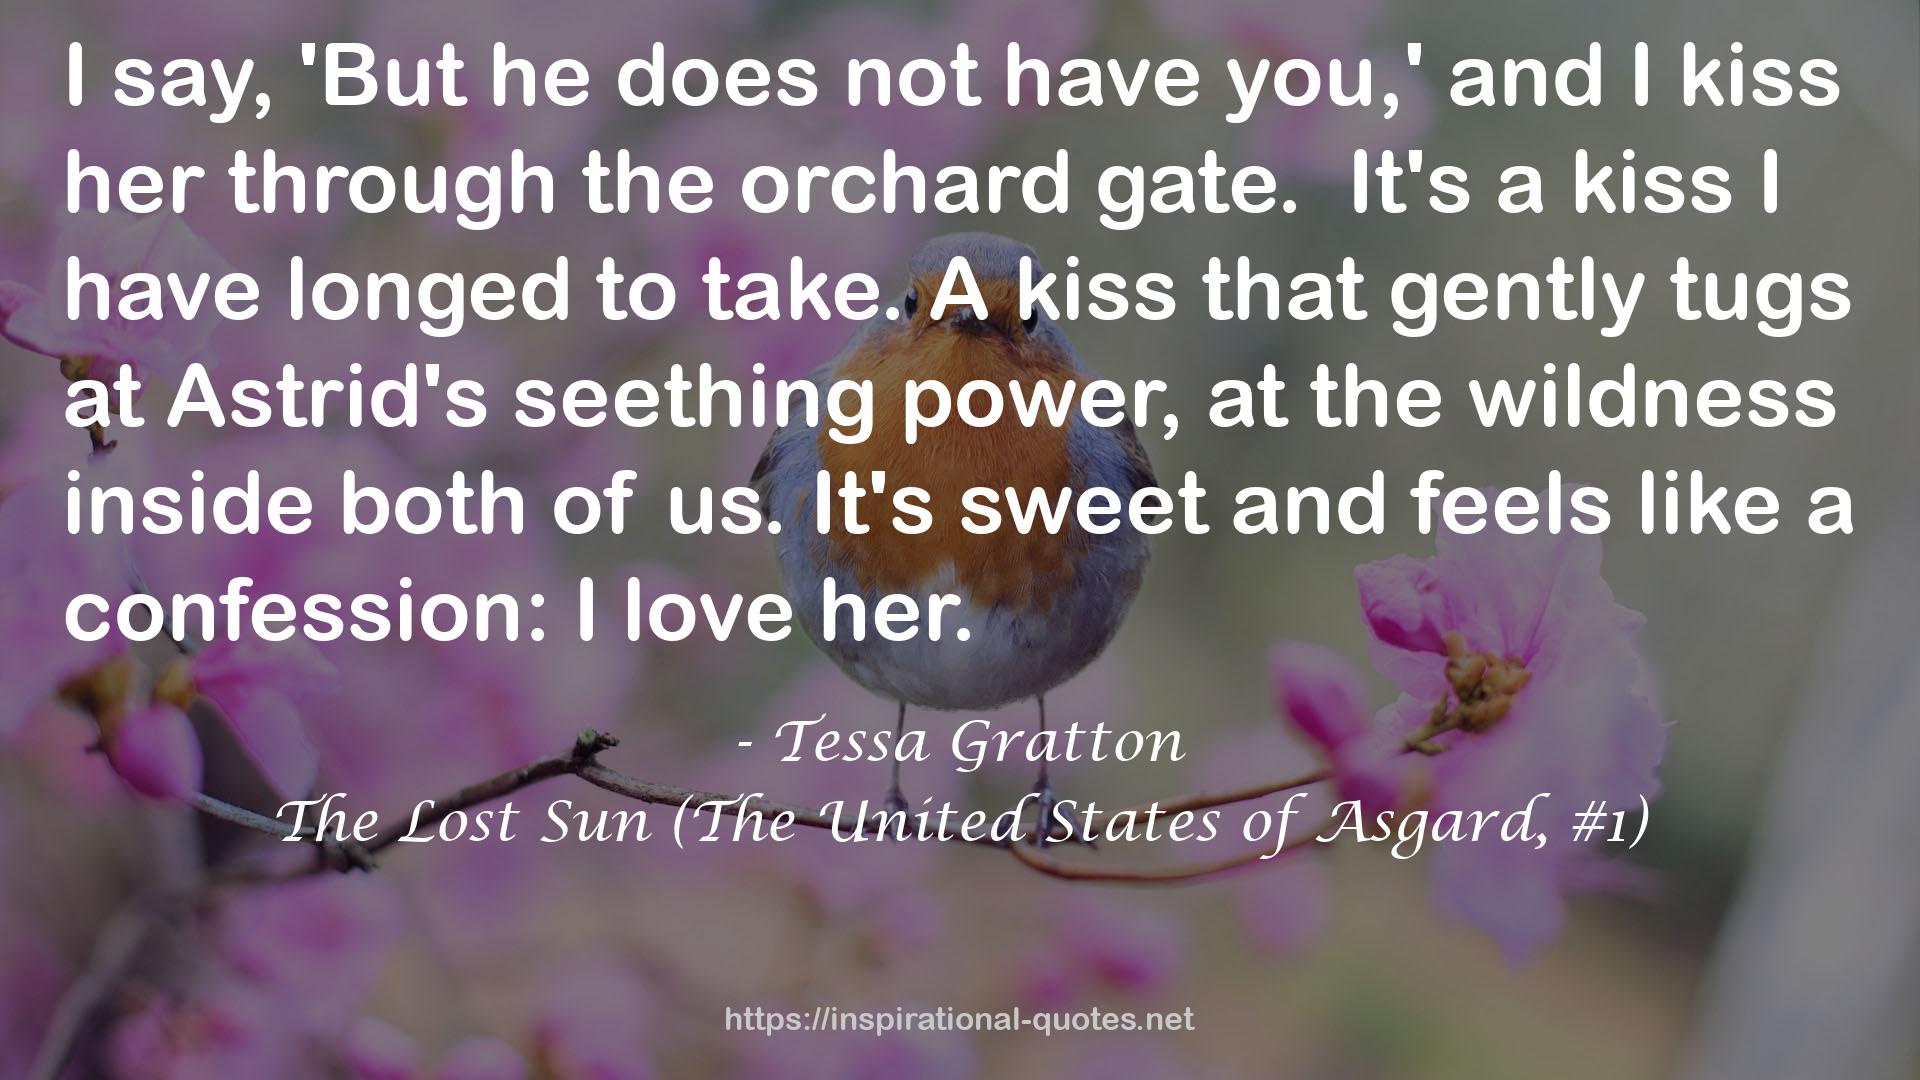 The Lost Sun (The United States of Asgard, #1) QUOTES